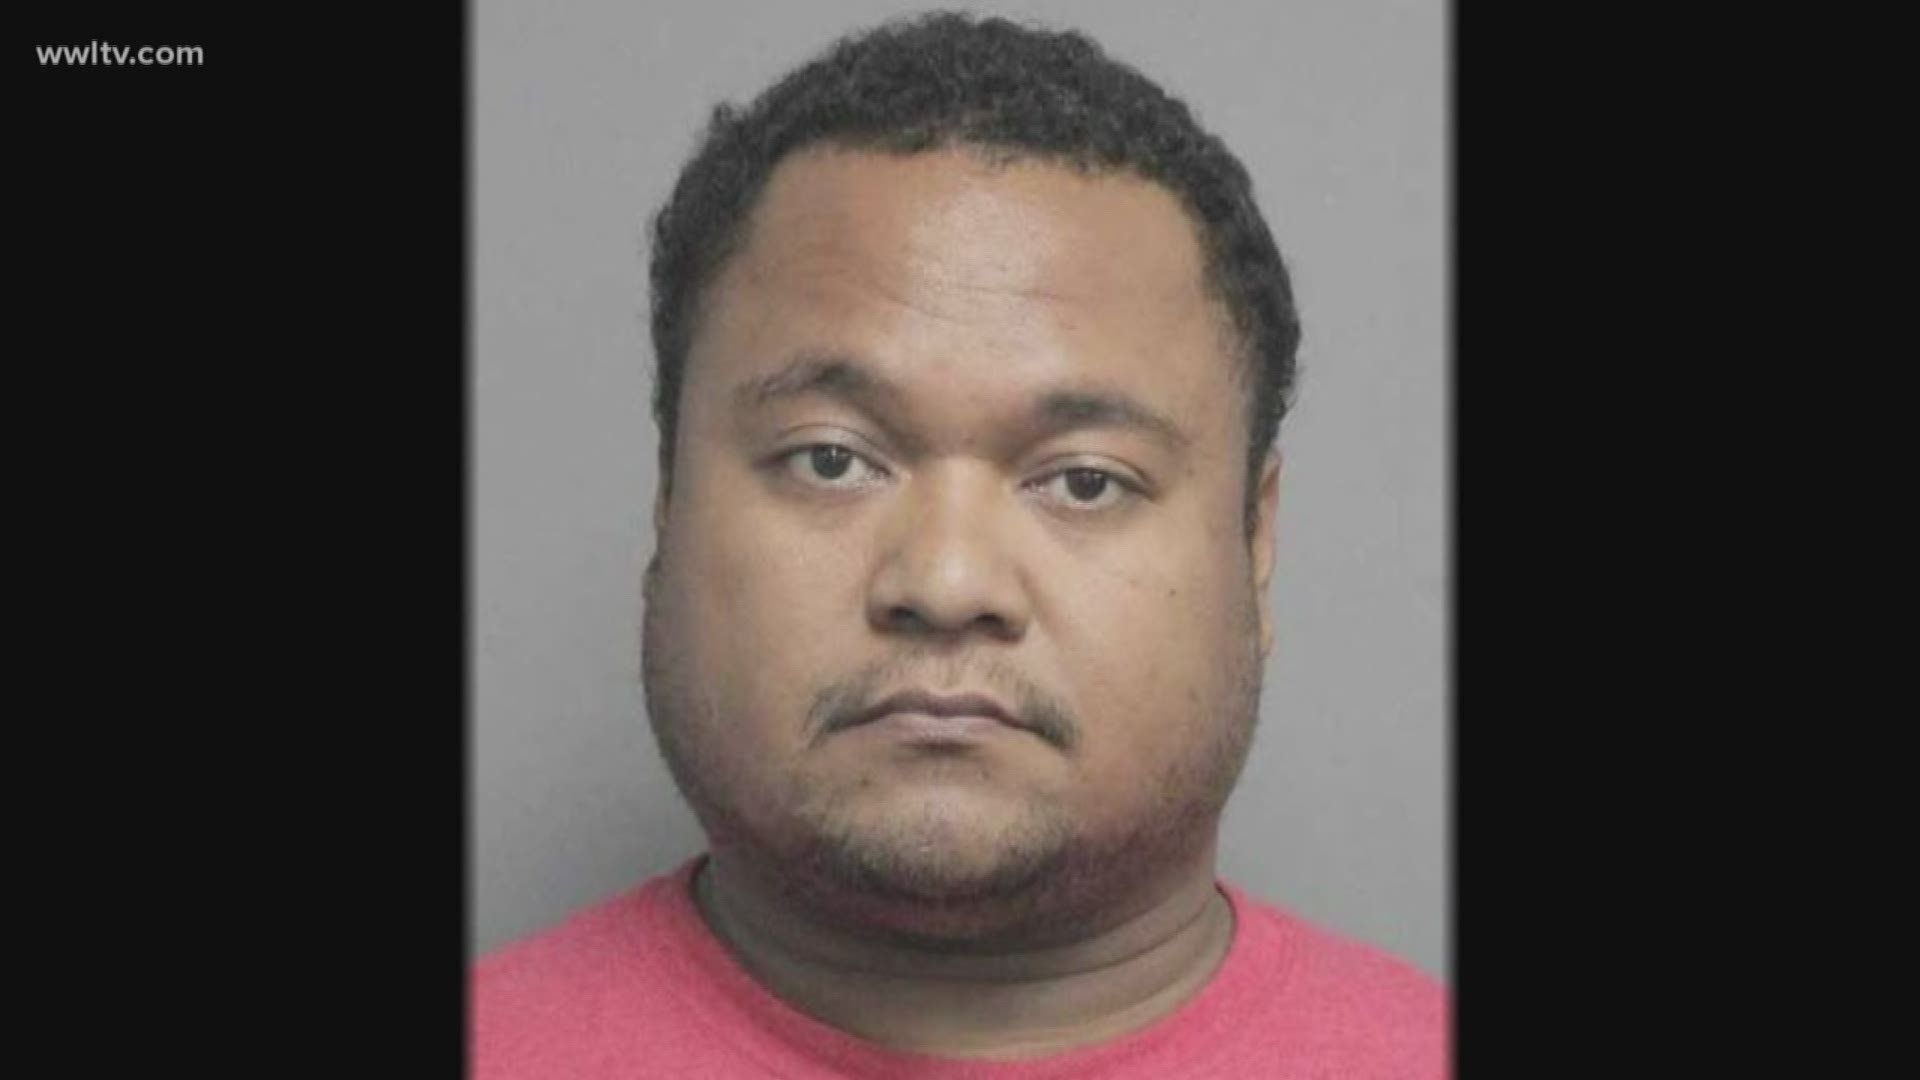 Moses was arrested after the National Center for Missing and Exploited Children flagged an unknown person uploading images of child sexual abuse to social media